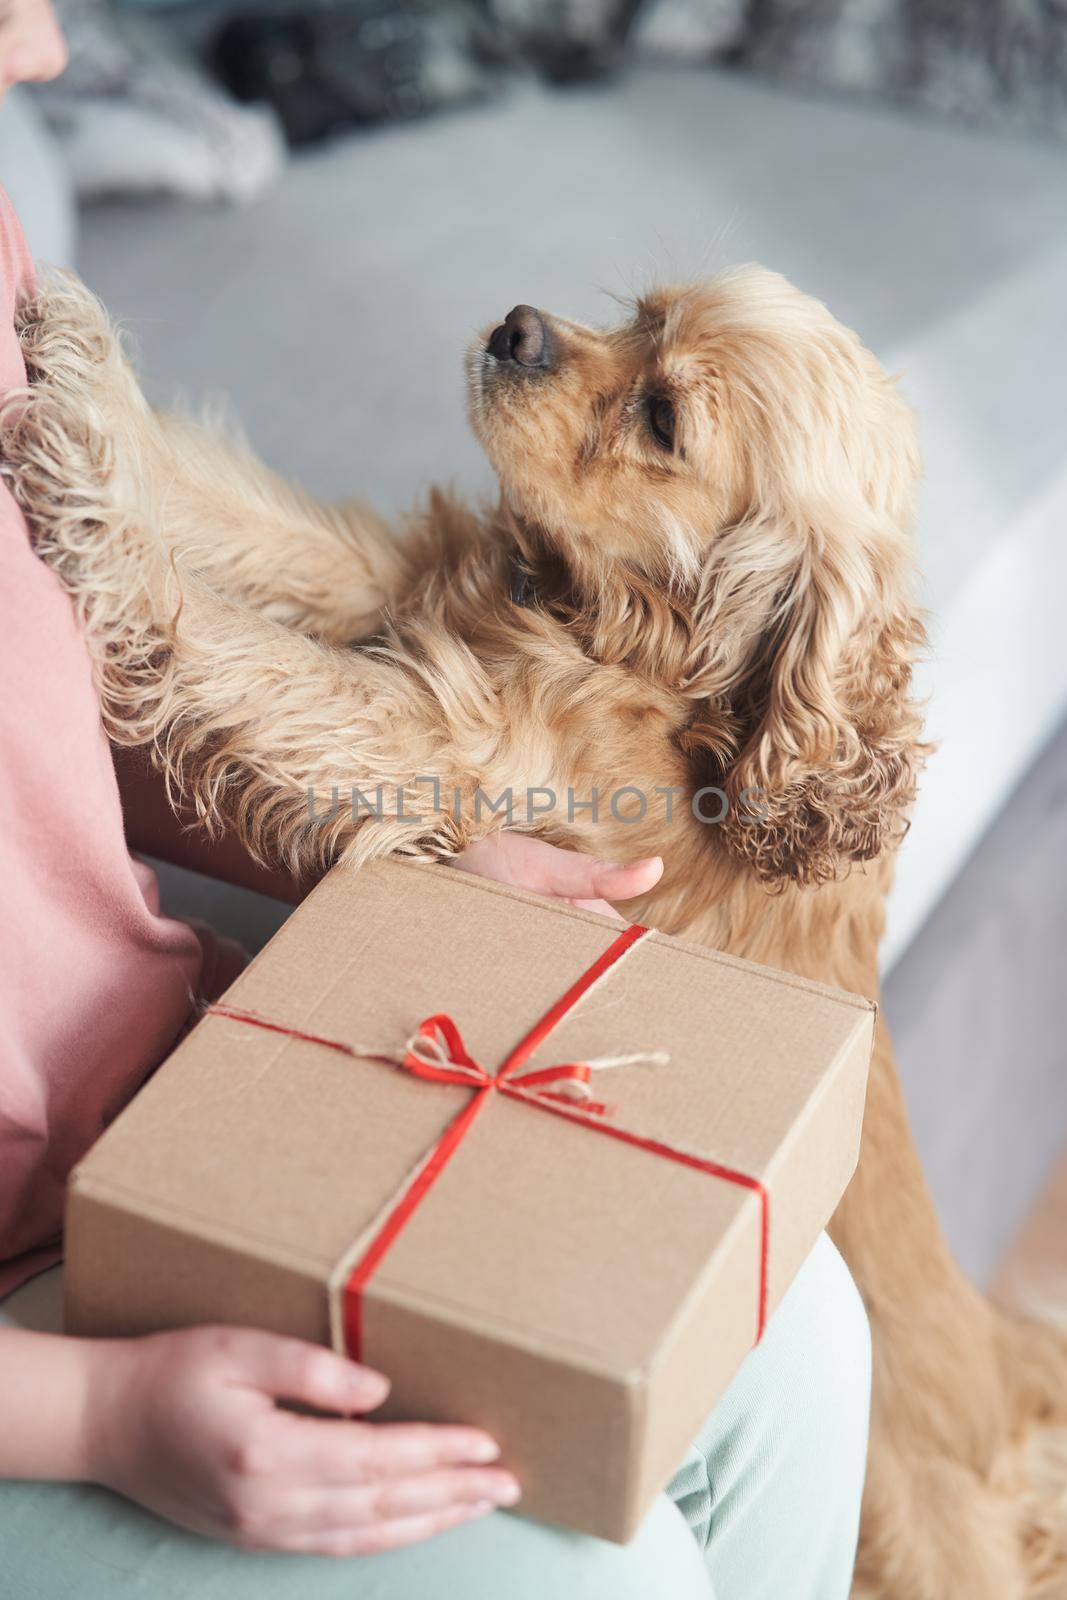 Selected focus. Girl holding a gift box with a red ribbon in her hands. The girl received a gift